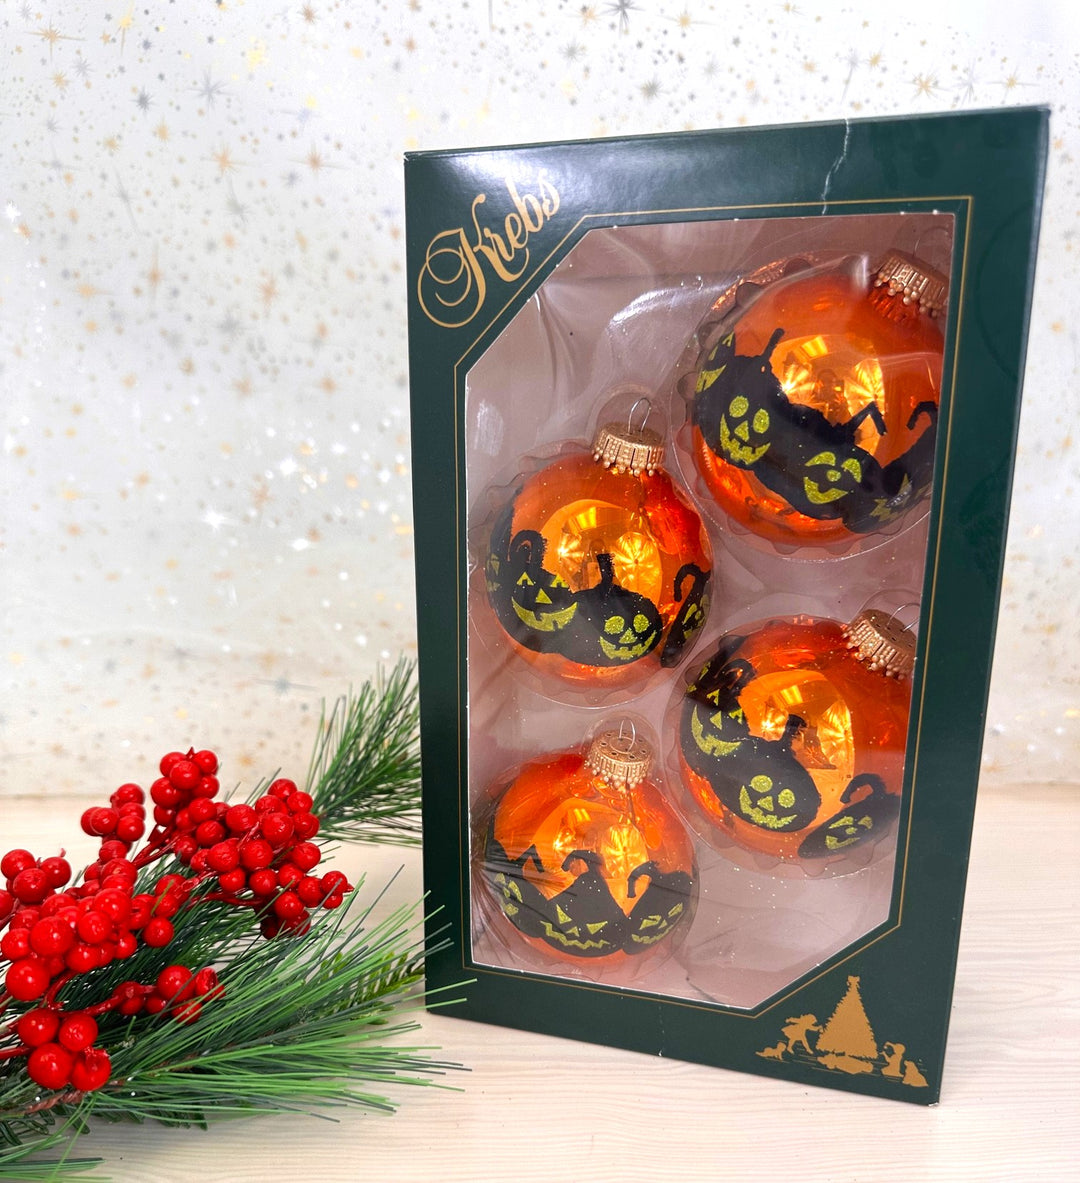 Halloween Tree Ornaments - 67mm/2.625" Decorated Glass Balls from Christmas by Krebs - Handmade Seamless Hanging Holiday Decorations for Trees - Set of 4 (Shiny Orange Crush with Jack-O-Lanters)